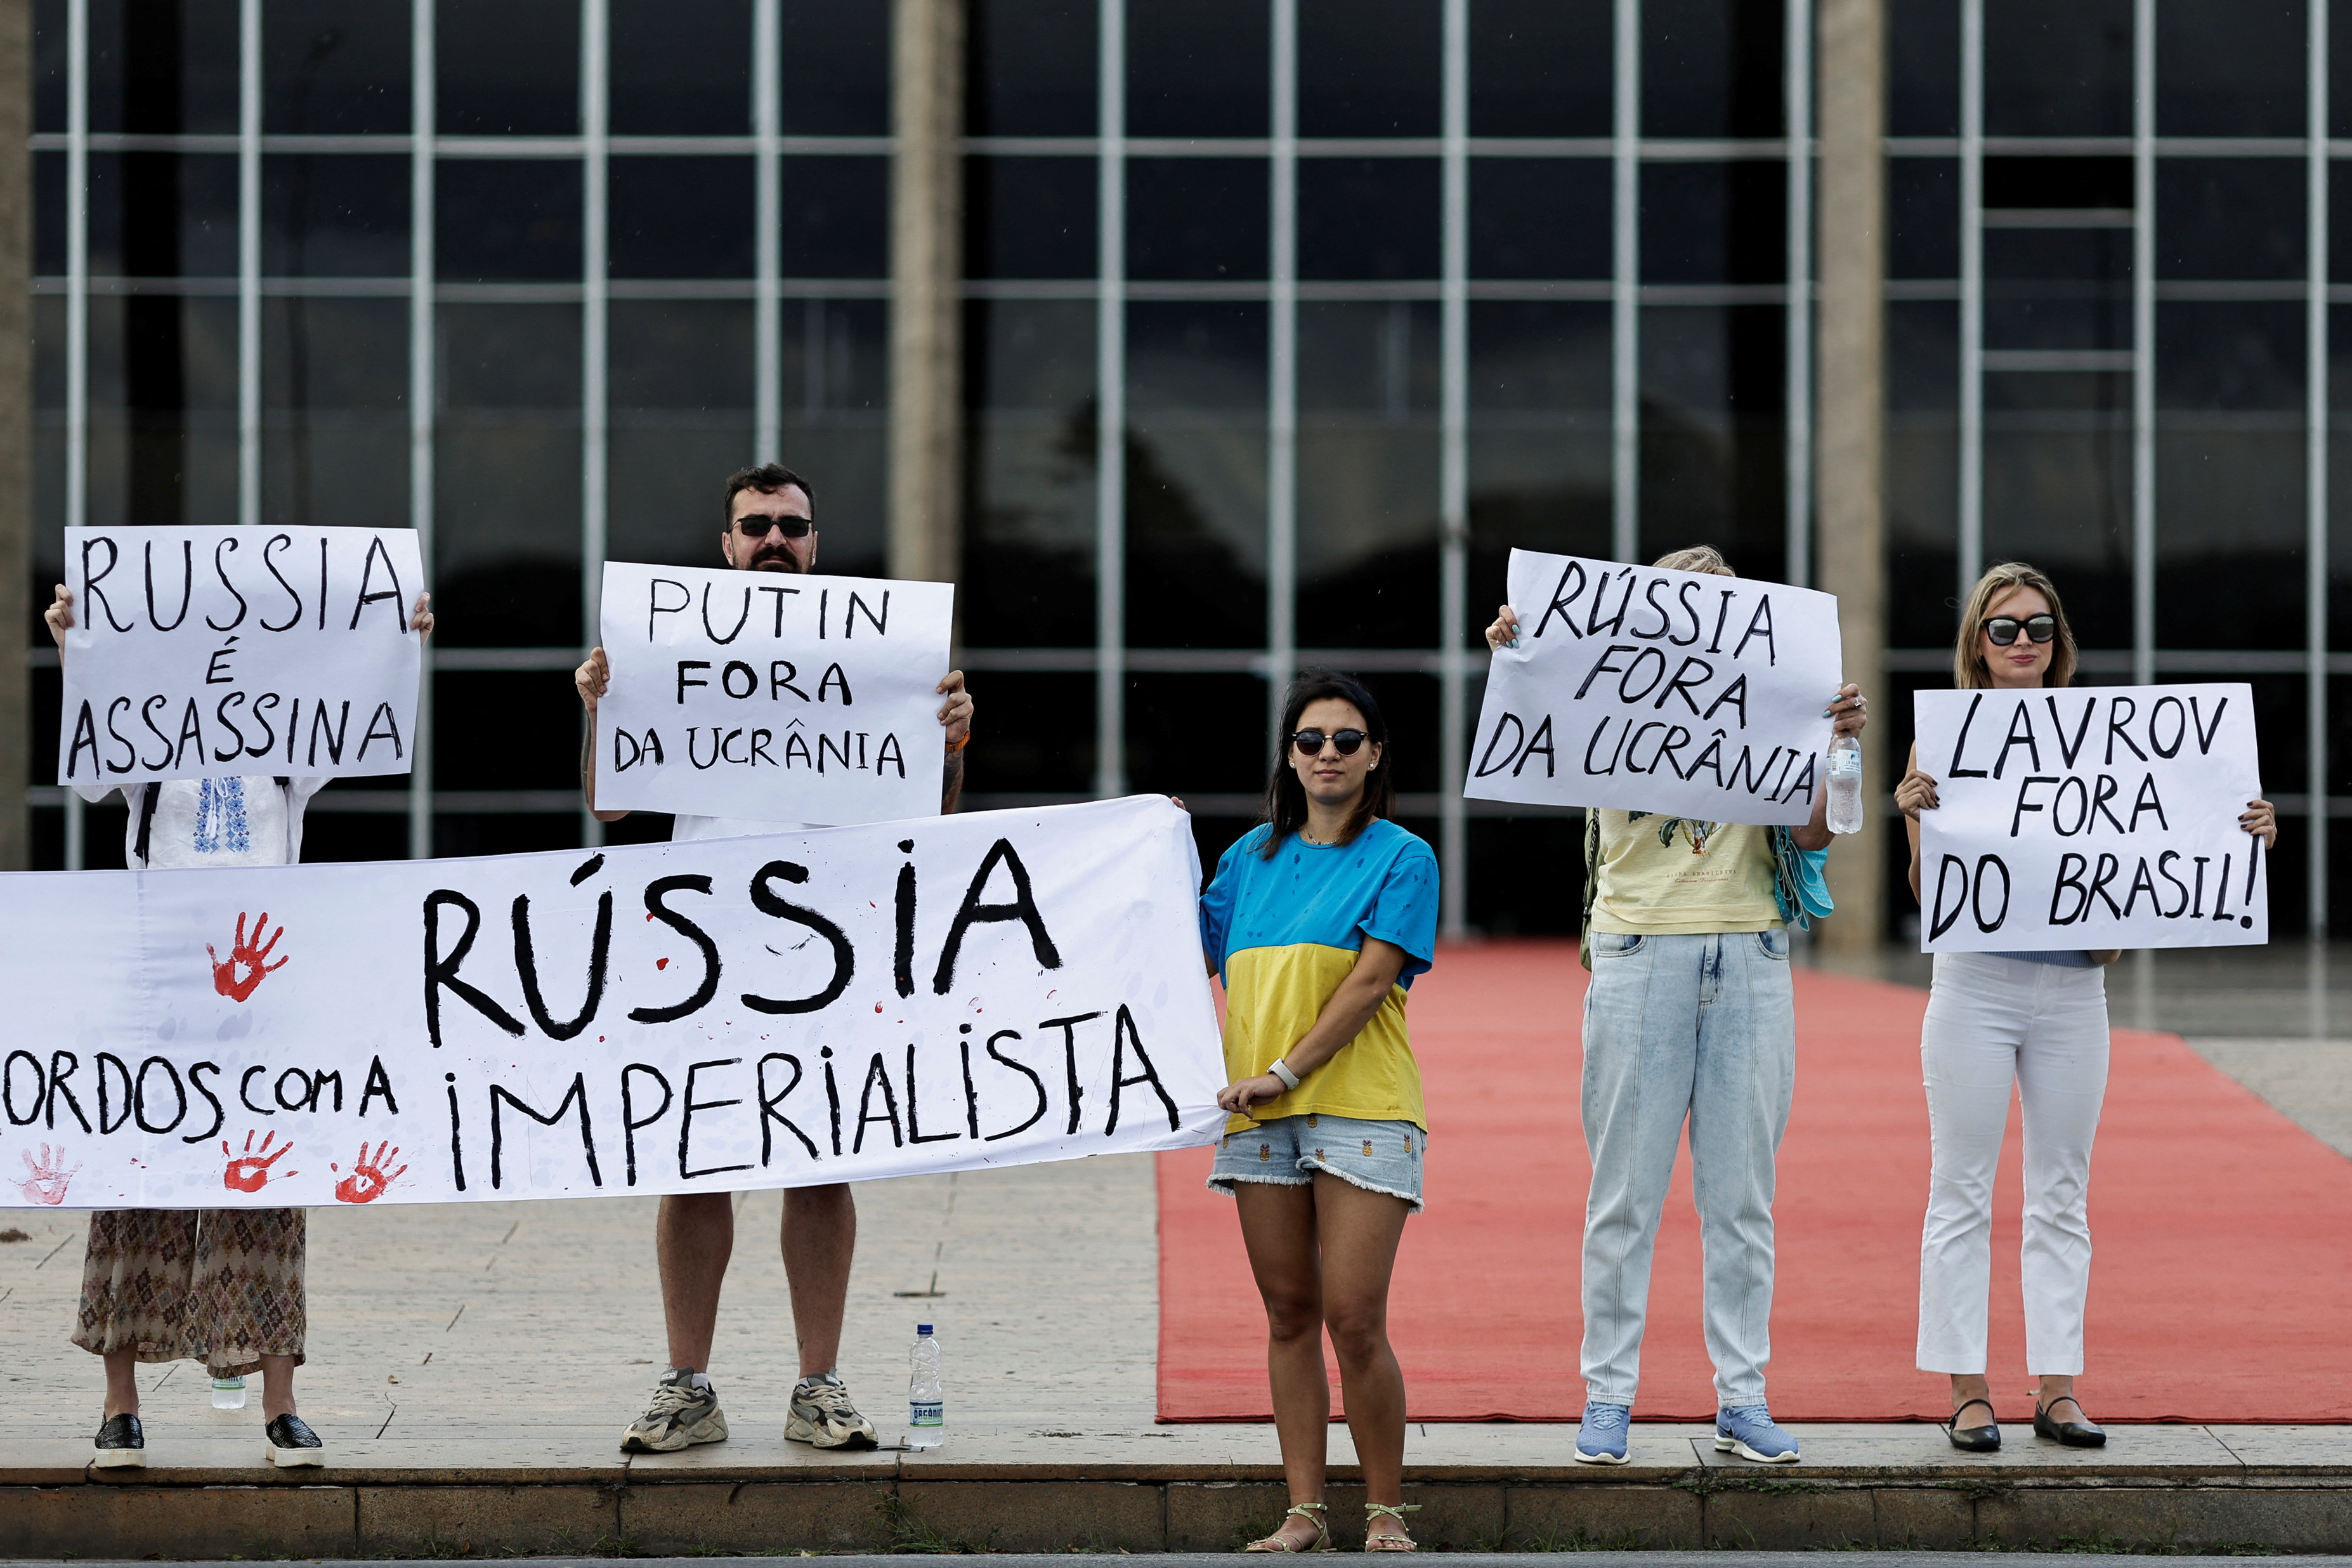 People hold signs as they protest against Russia's Foreign Minister Sergei Lavrov visit to Brazil and to support Ukraine in Brasilia, Brazil, April 17, 2023. REUTERS/Ueslei Marcelino